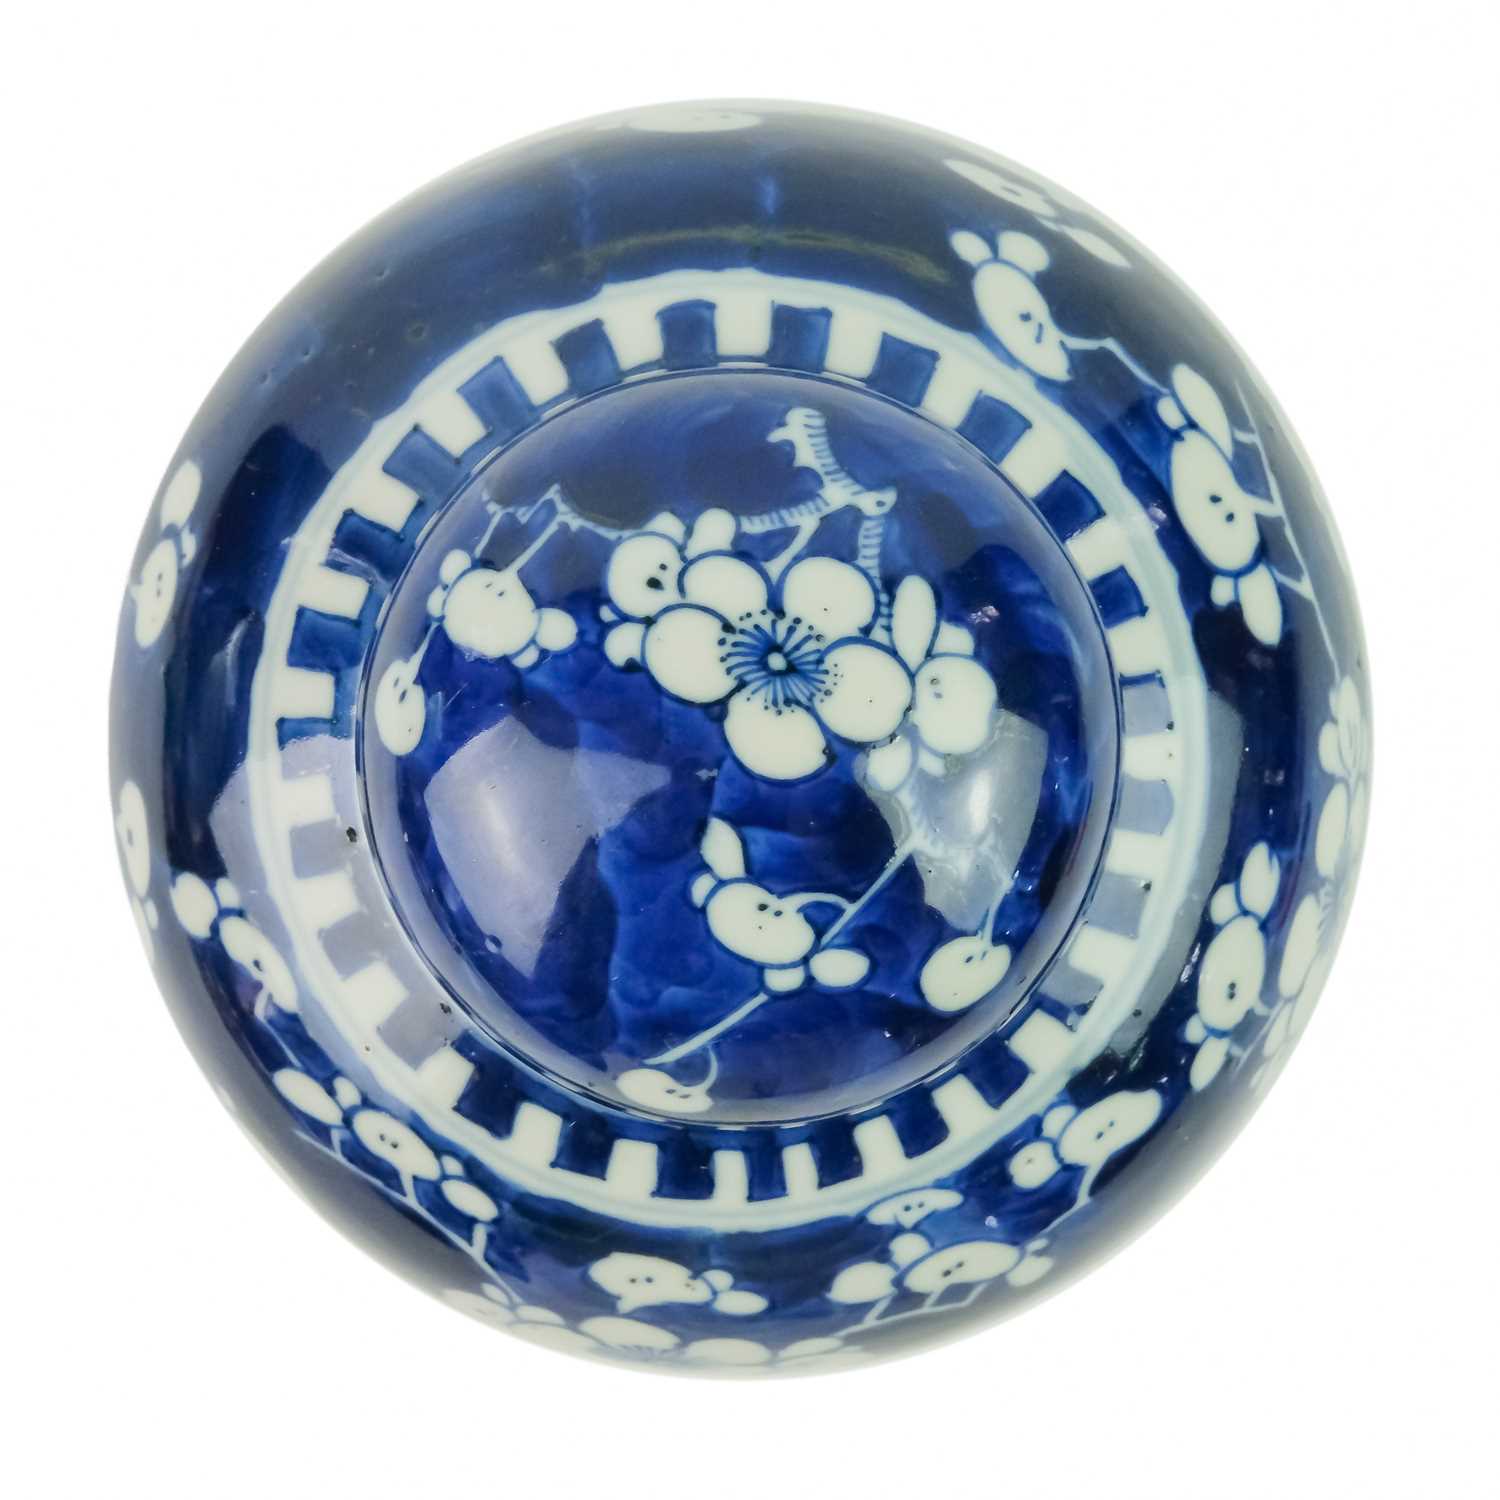 A Chinese blue & white prunus blossom pattern ginger jar & cover, circa 1900. - Image 3 of 6